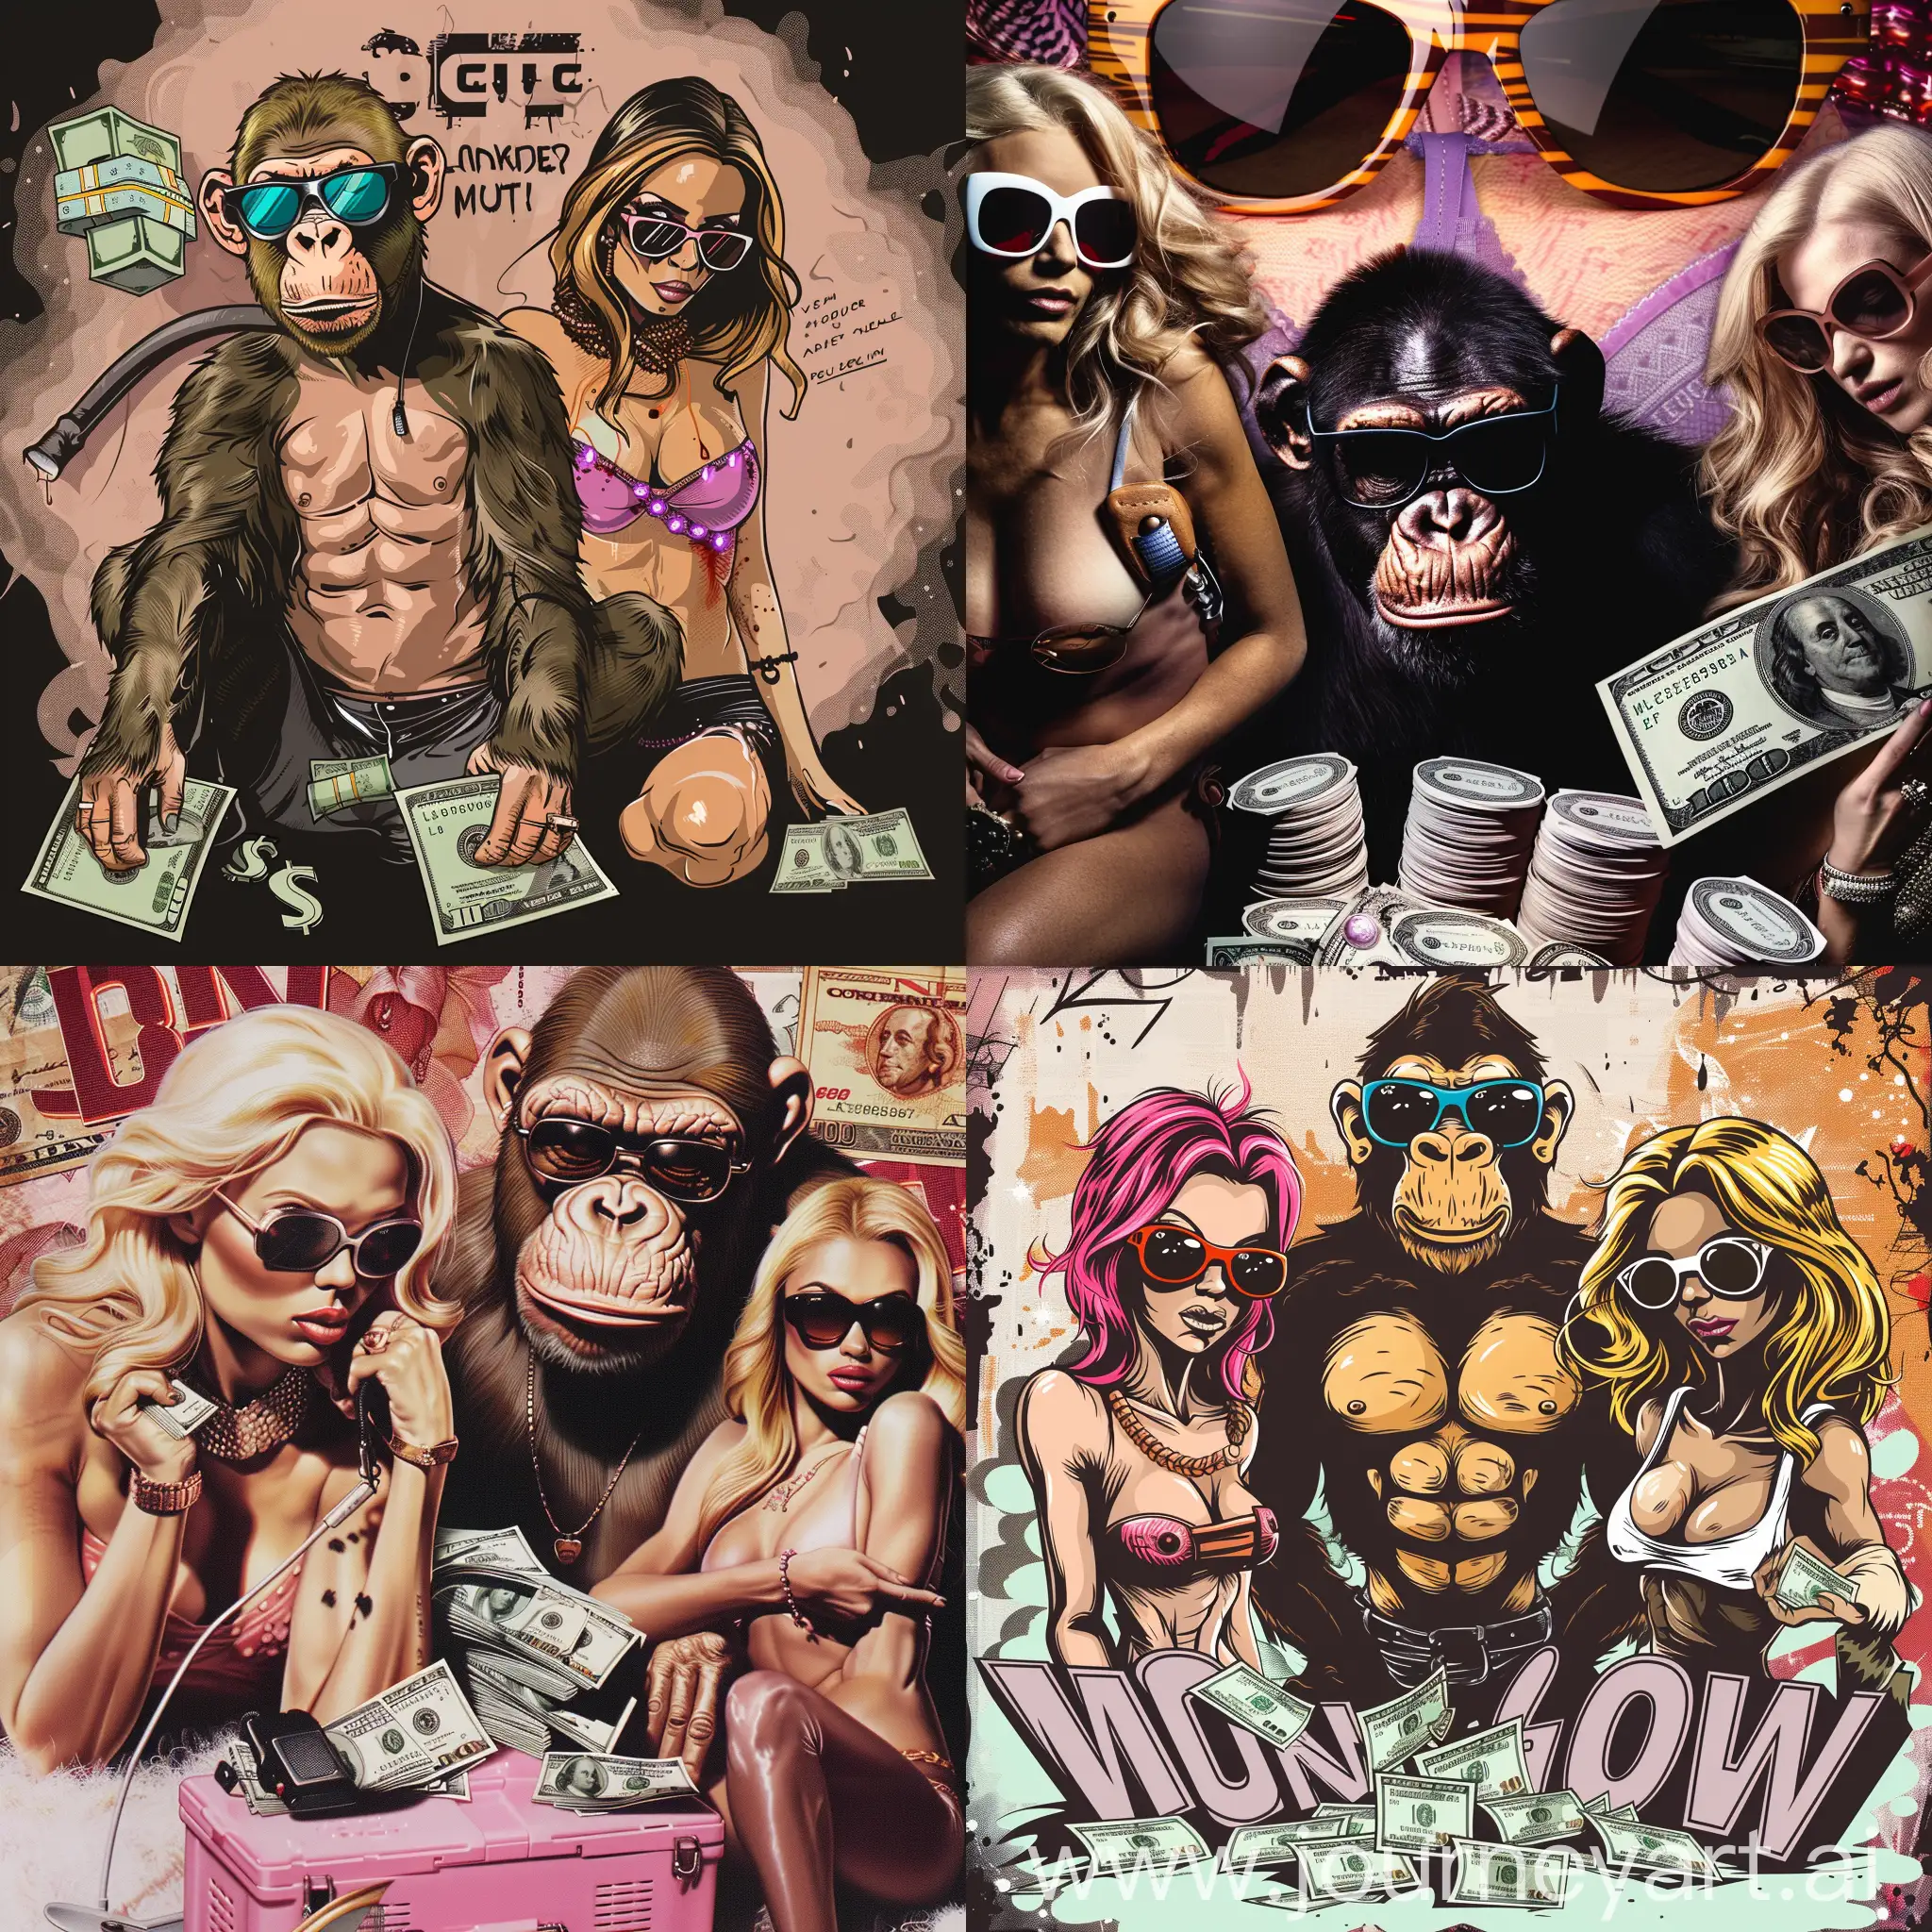 Pump charts, Ape, cool sunglases, sexy ladies, wads of cash